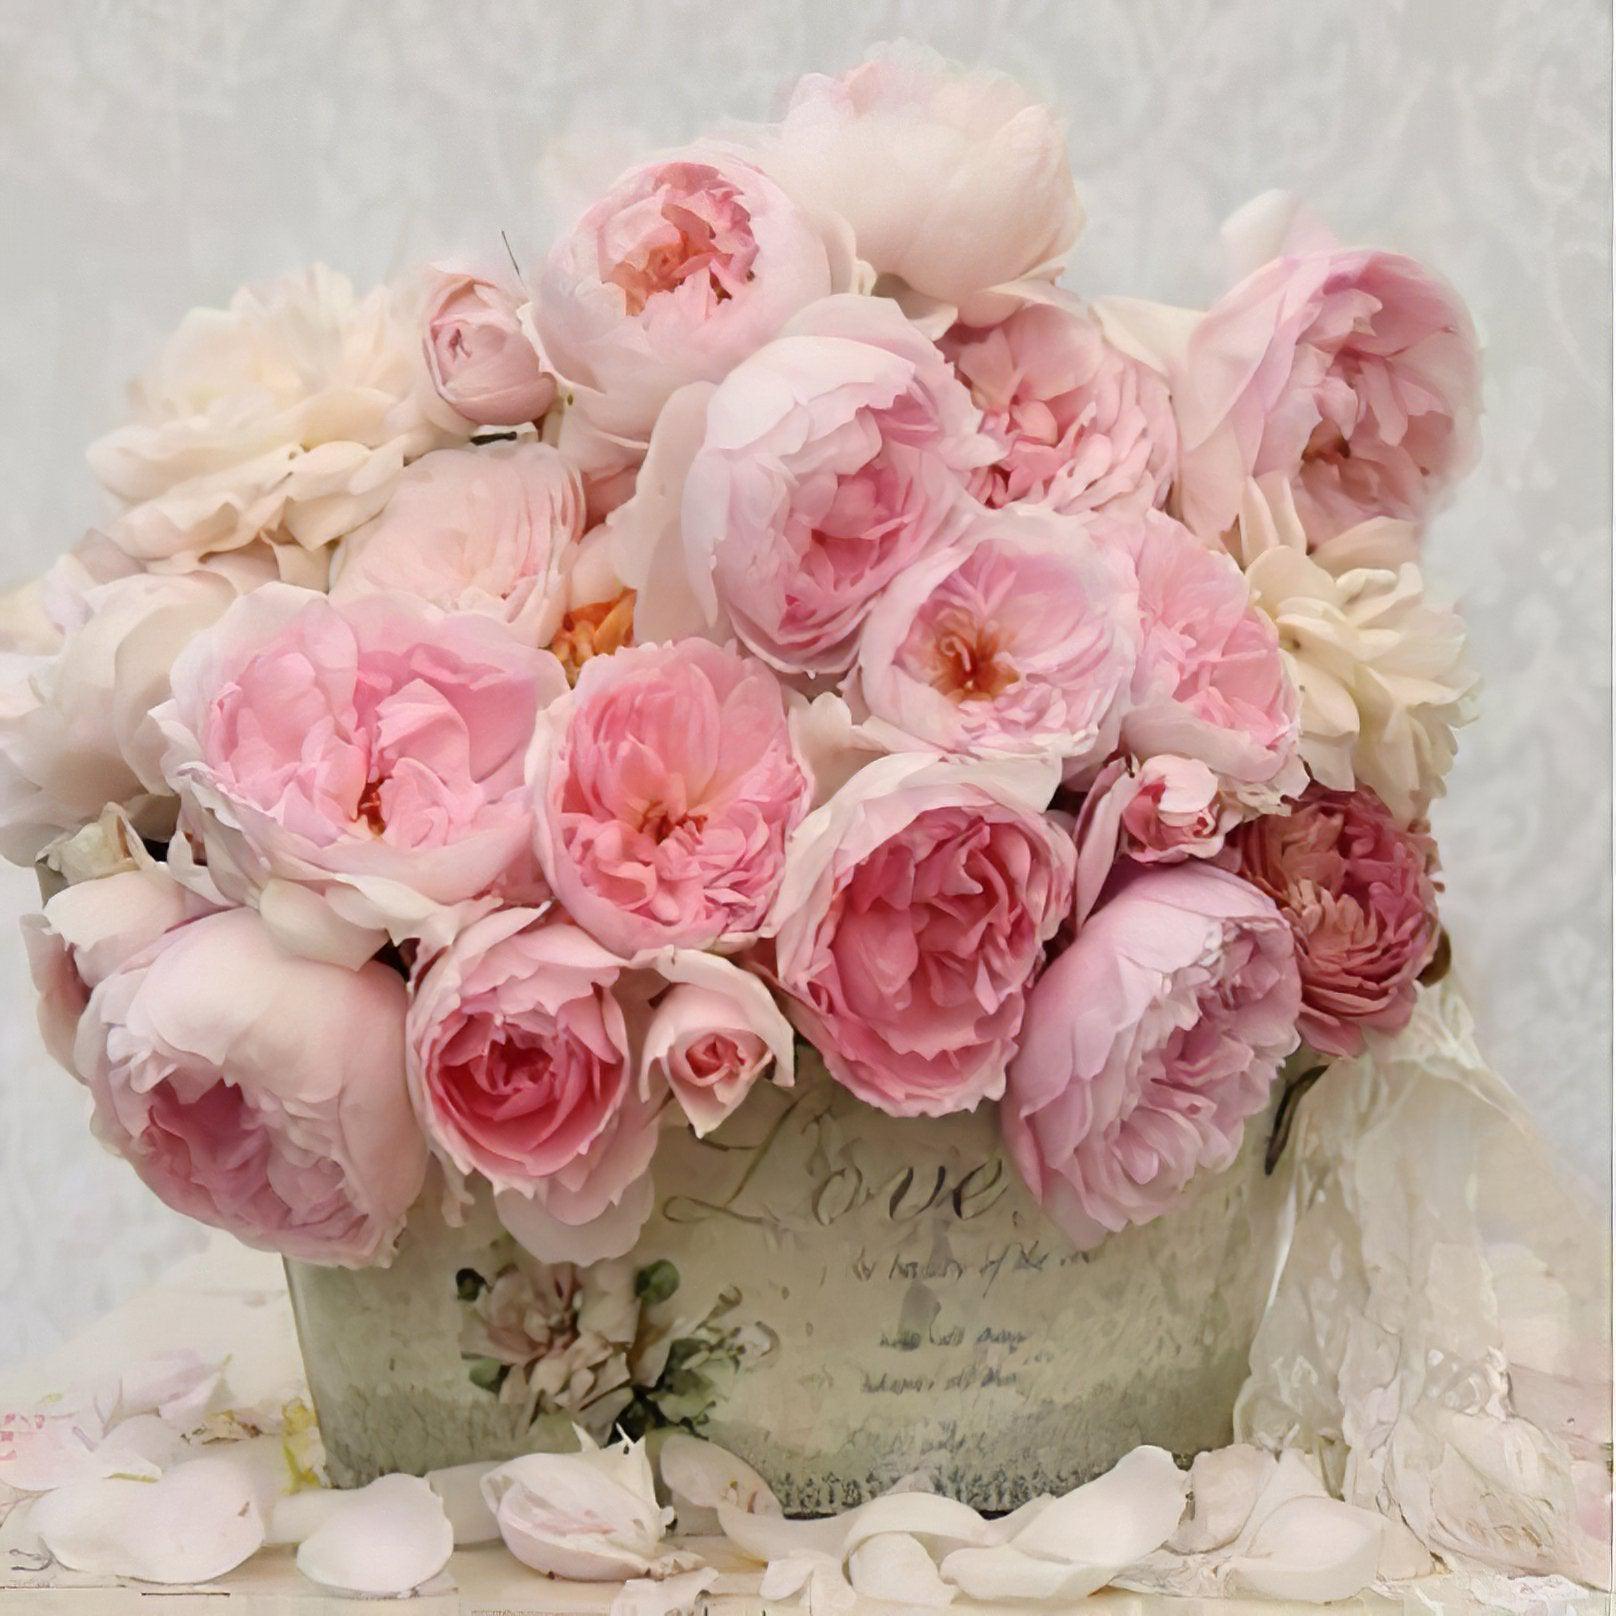 Amazing Bouquet of Roses: Blossoming beauty and romance Amazing Bouquet Of Roses - Diamondartlove